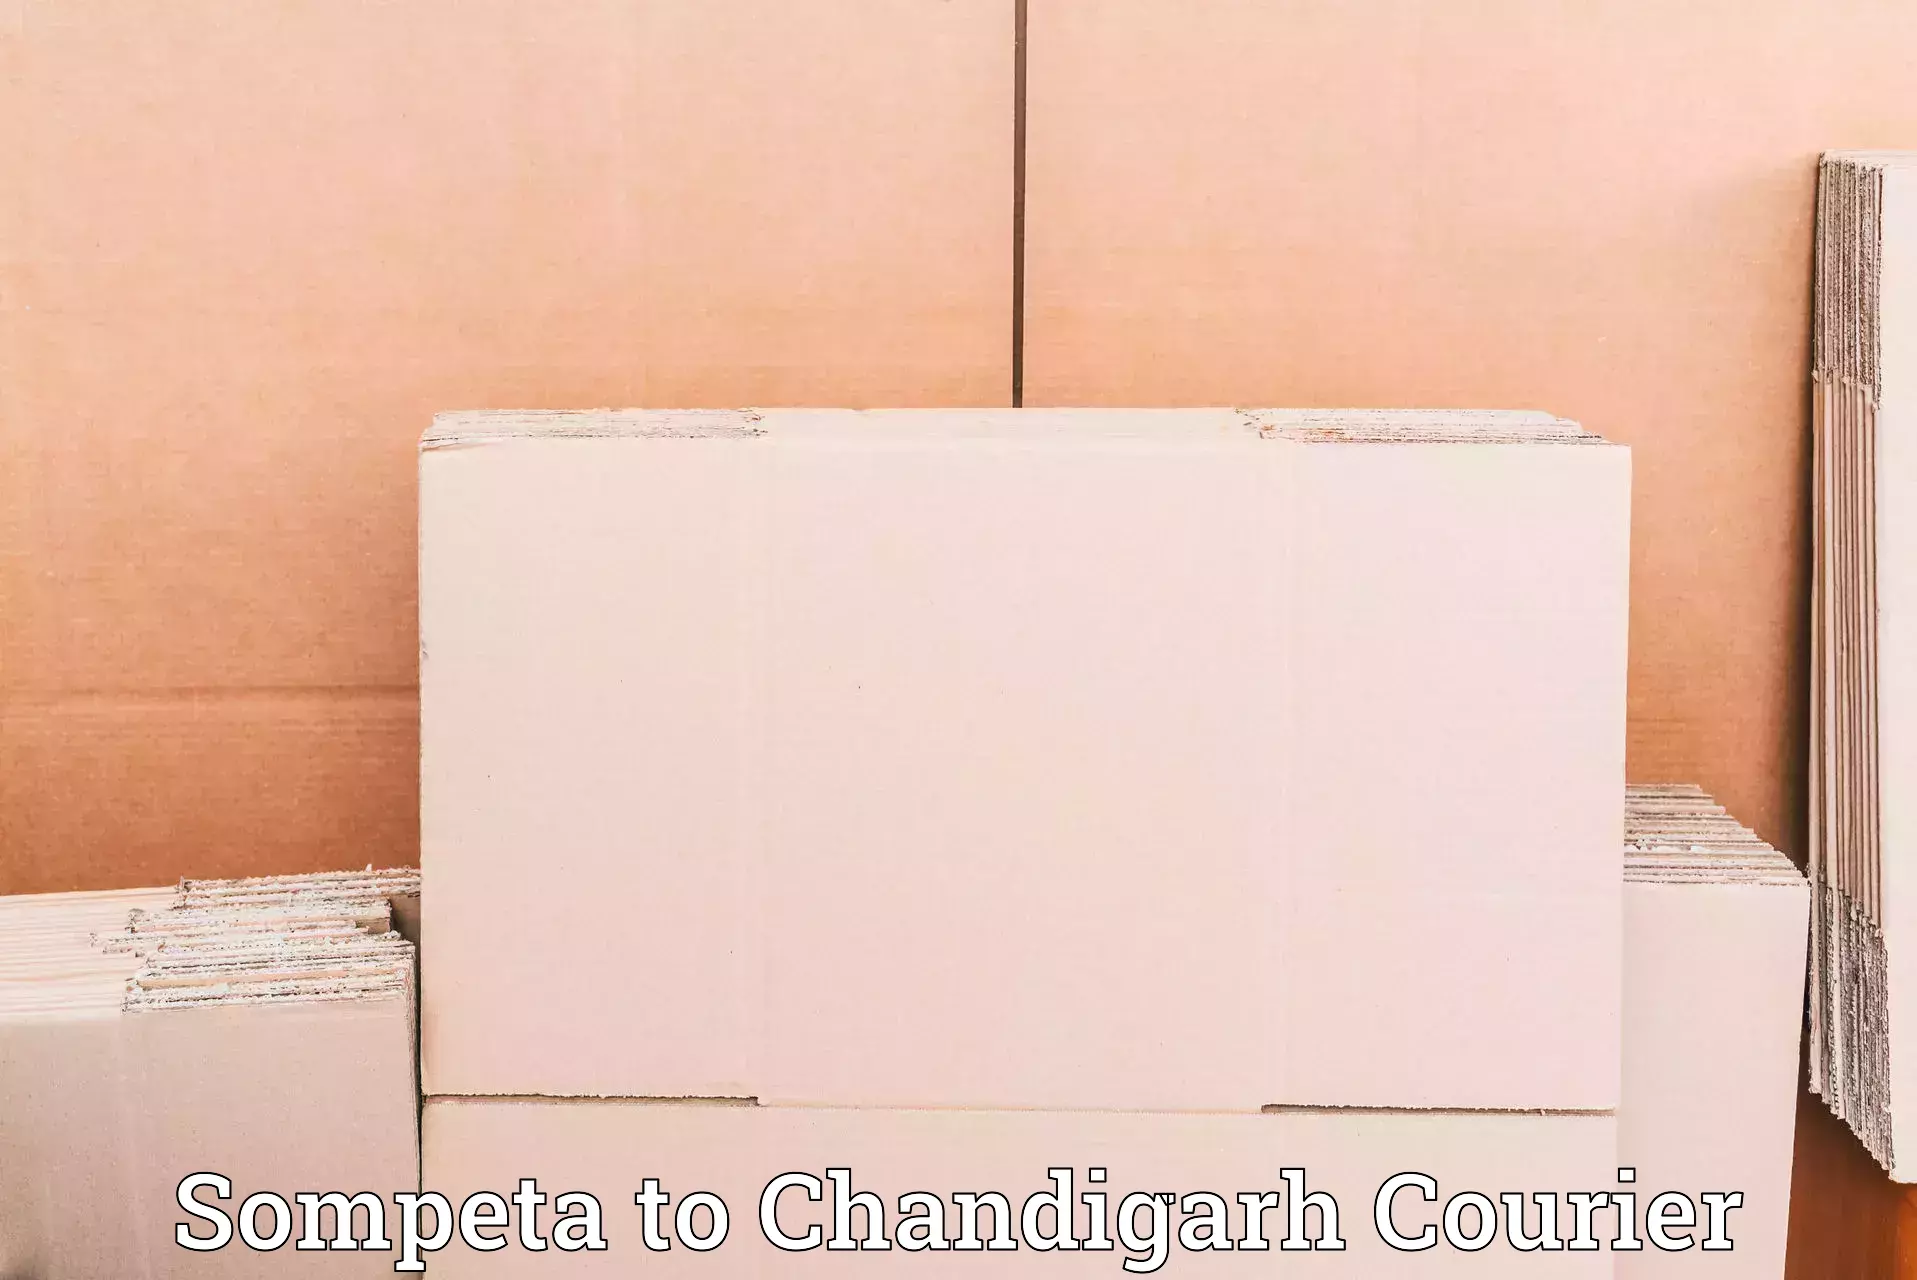 Next day courier Sompeta to Chandigarh